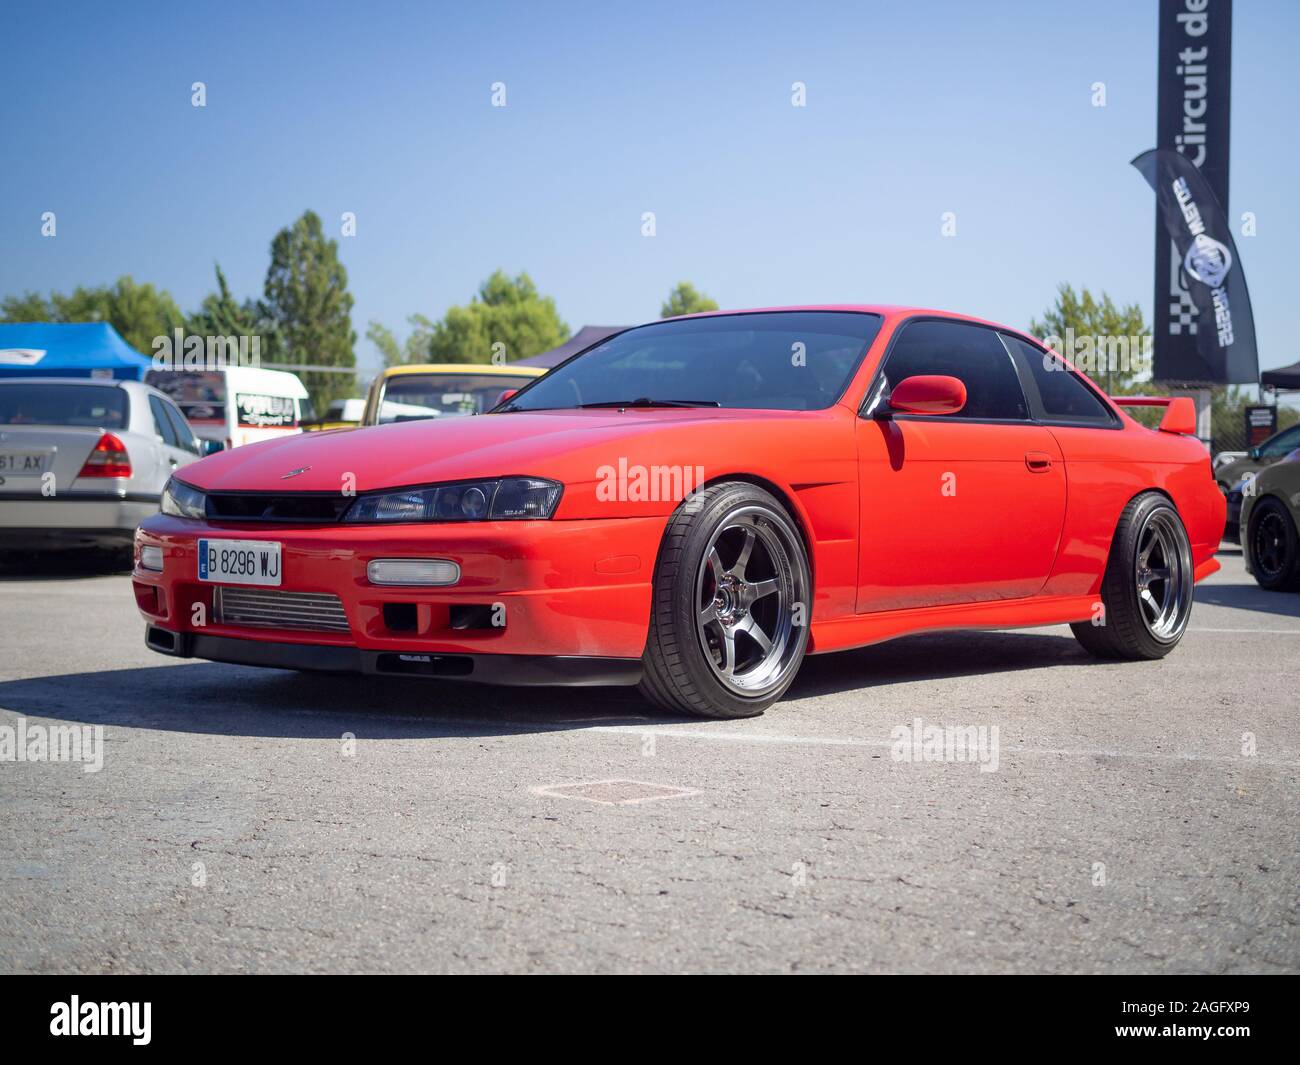 Nissan Silvia S14 High Resolution Stock Photography And Images Alamy